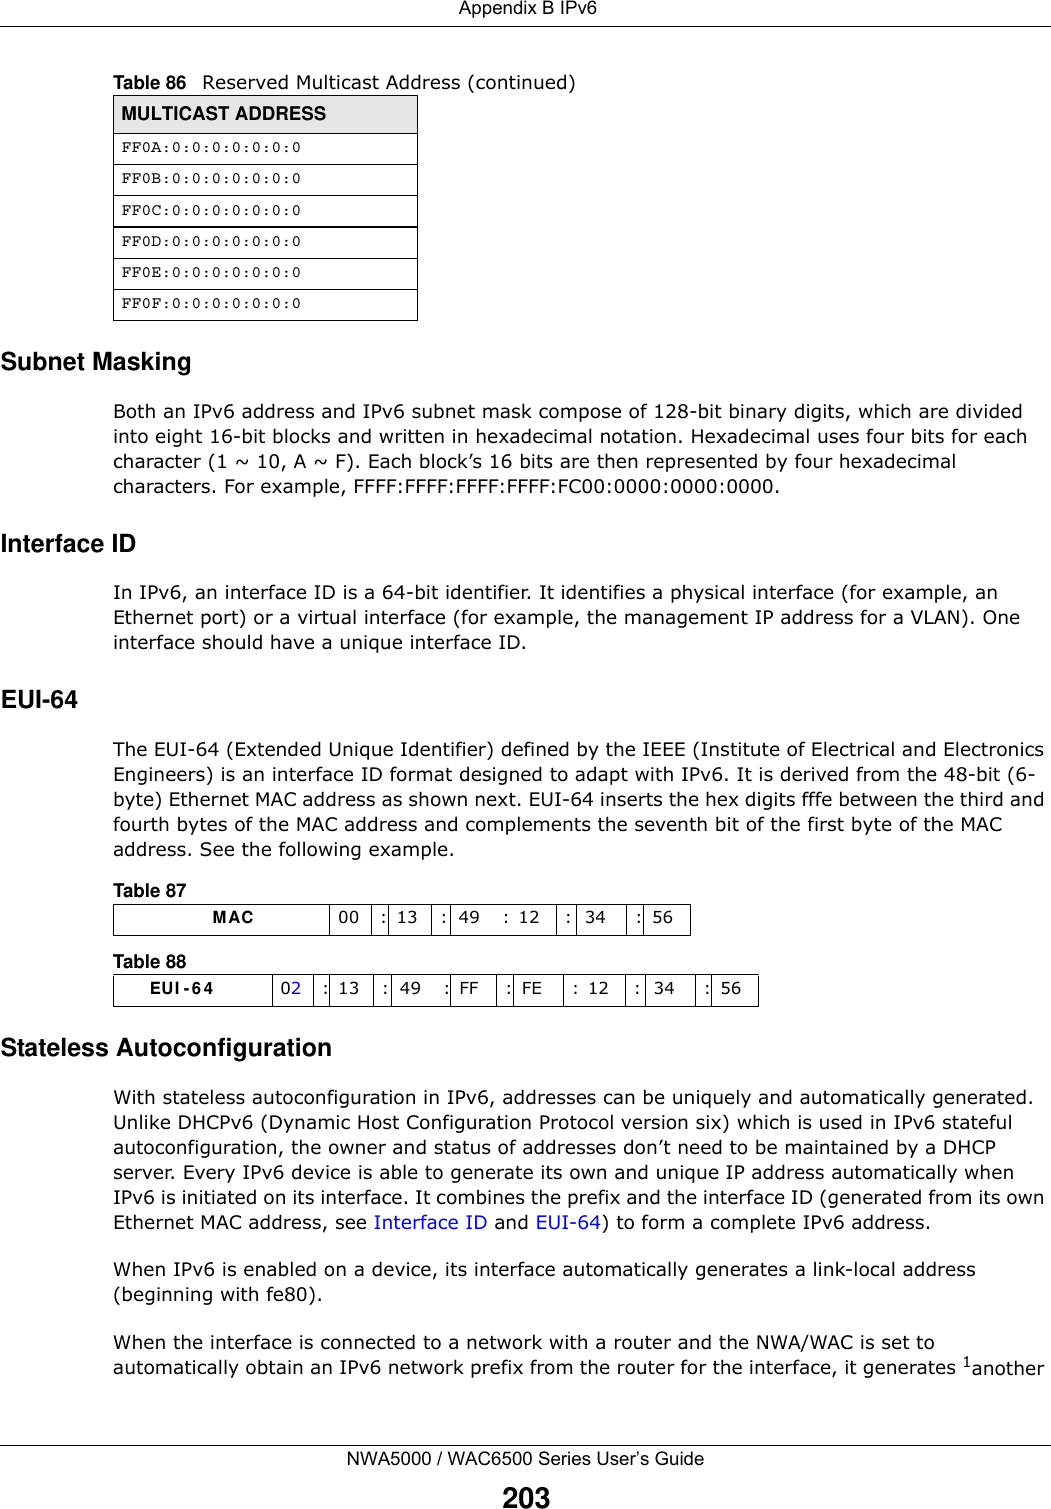  Appendix B IPv6NWA5000 / WAC6500 Series User’s Guide203Subnet MaskingBoth an IPv6 address and IPv6 subnet mask compose of 128-bit binary digits, which are divided into eight 16-bit blocks and written in hexadecimal notation. Hexadecimal uses four bits for each character (1 ~ 10, A ~ F). Each block’s 16 bits are then represented by four hexadecimal characters. For example, FFFF:FFFF:FFFF:FFFF:FC00:0000:0000:0000.Interface IDIn IPv6, an interface ID is a 64-bit identifier. It identifies a physical interface (for example, an Ethernet port) or a virtual interface (for example, the management IP address for a VLAN). One interface should have a unique interface ID.EUI-64The EUI-64 (Extended Unique Identifier) defined by the IEEE (Institute of Electrical and Electronics Engineers) is an interface ID format designed to adapt with IPv6. It is derived from the 48-bit (6-byte) Ethernet MAC address as shown next. EUI-64 inserts the hex digits fffe between the third and fourth bytes of the MAC address and complements the seventh bit of the first byte of the MAC address. See the following example. Stateless AutoconfigurationWith stateless autoconfiguration in IPv6, addresses can be uniquely and automatically generated. Unlike DHCPv6 (Dynamic Host Configuration Protocol version six) which is used in IPv6 stateful autoconfiguration, the owner and status of addresses don’t need to be maintained by a DHCP server. Every IPv6 device is able to generate its own and unique IP address automatically when IPv6 is initiated on its interface. It combines the prefix and the interface ID (generated from its own Ethernet MAC address, see Interface ID and EUI-64) to form a complete IPv6 address.When IPv6 is enabled on a device, its interface automatically generates a link-local address (beginning with fe80).When the interface is connected to a network with a router and the NWA/WAC is set to automatically obtain an IPv6 network prefix from the router for the interface, it generates 1another FF0A:0:0:0:0:0:0:0FF0B:0:0:0:0:0:0:0FF0C:0:0:0:0:0:0:0FF0D:0:0:0:0:0:0:0FF0E:0:0:0:0:0:0:0FF0F:0:0:0:0:0:0:0Table 86   Reserved Multicast Address (continued)MULTICAST ADDRESSTable 87                   MAC 00 : 13 : 49 : 12 : 34 : 56Table 88        EUI - 6 4 02: 13 : 49 : FF : FE : 12 : 34 : 56